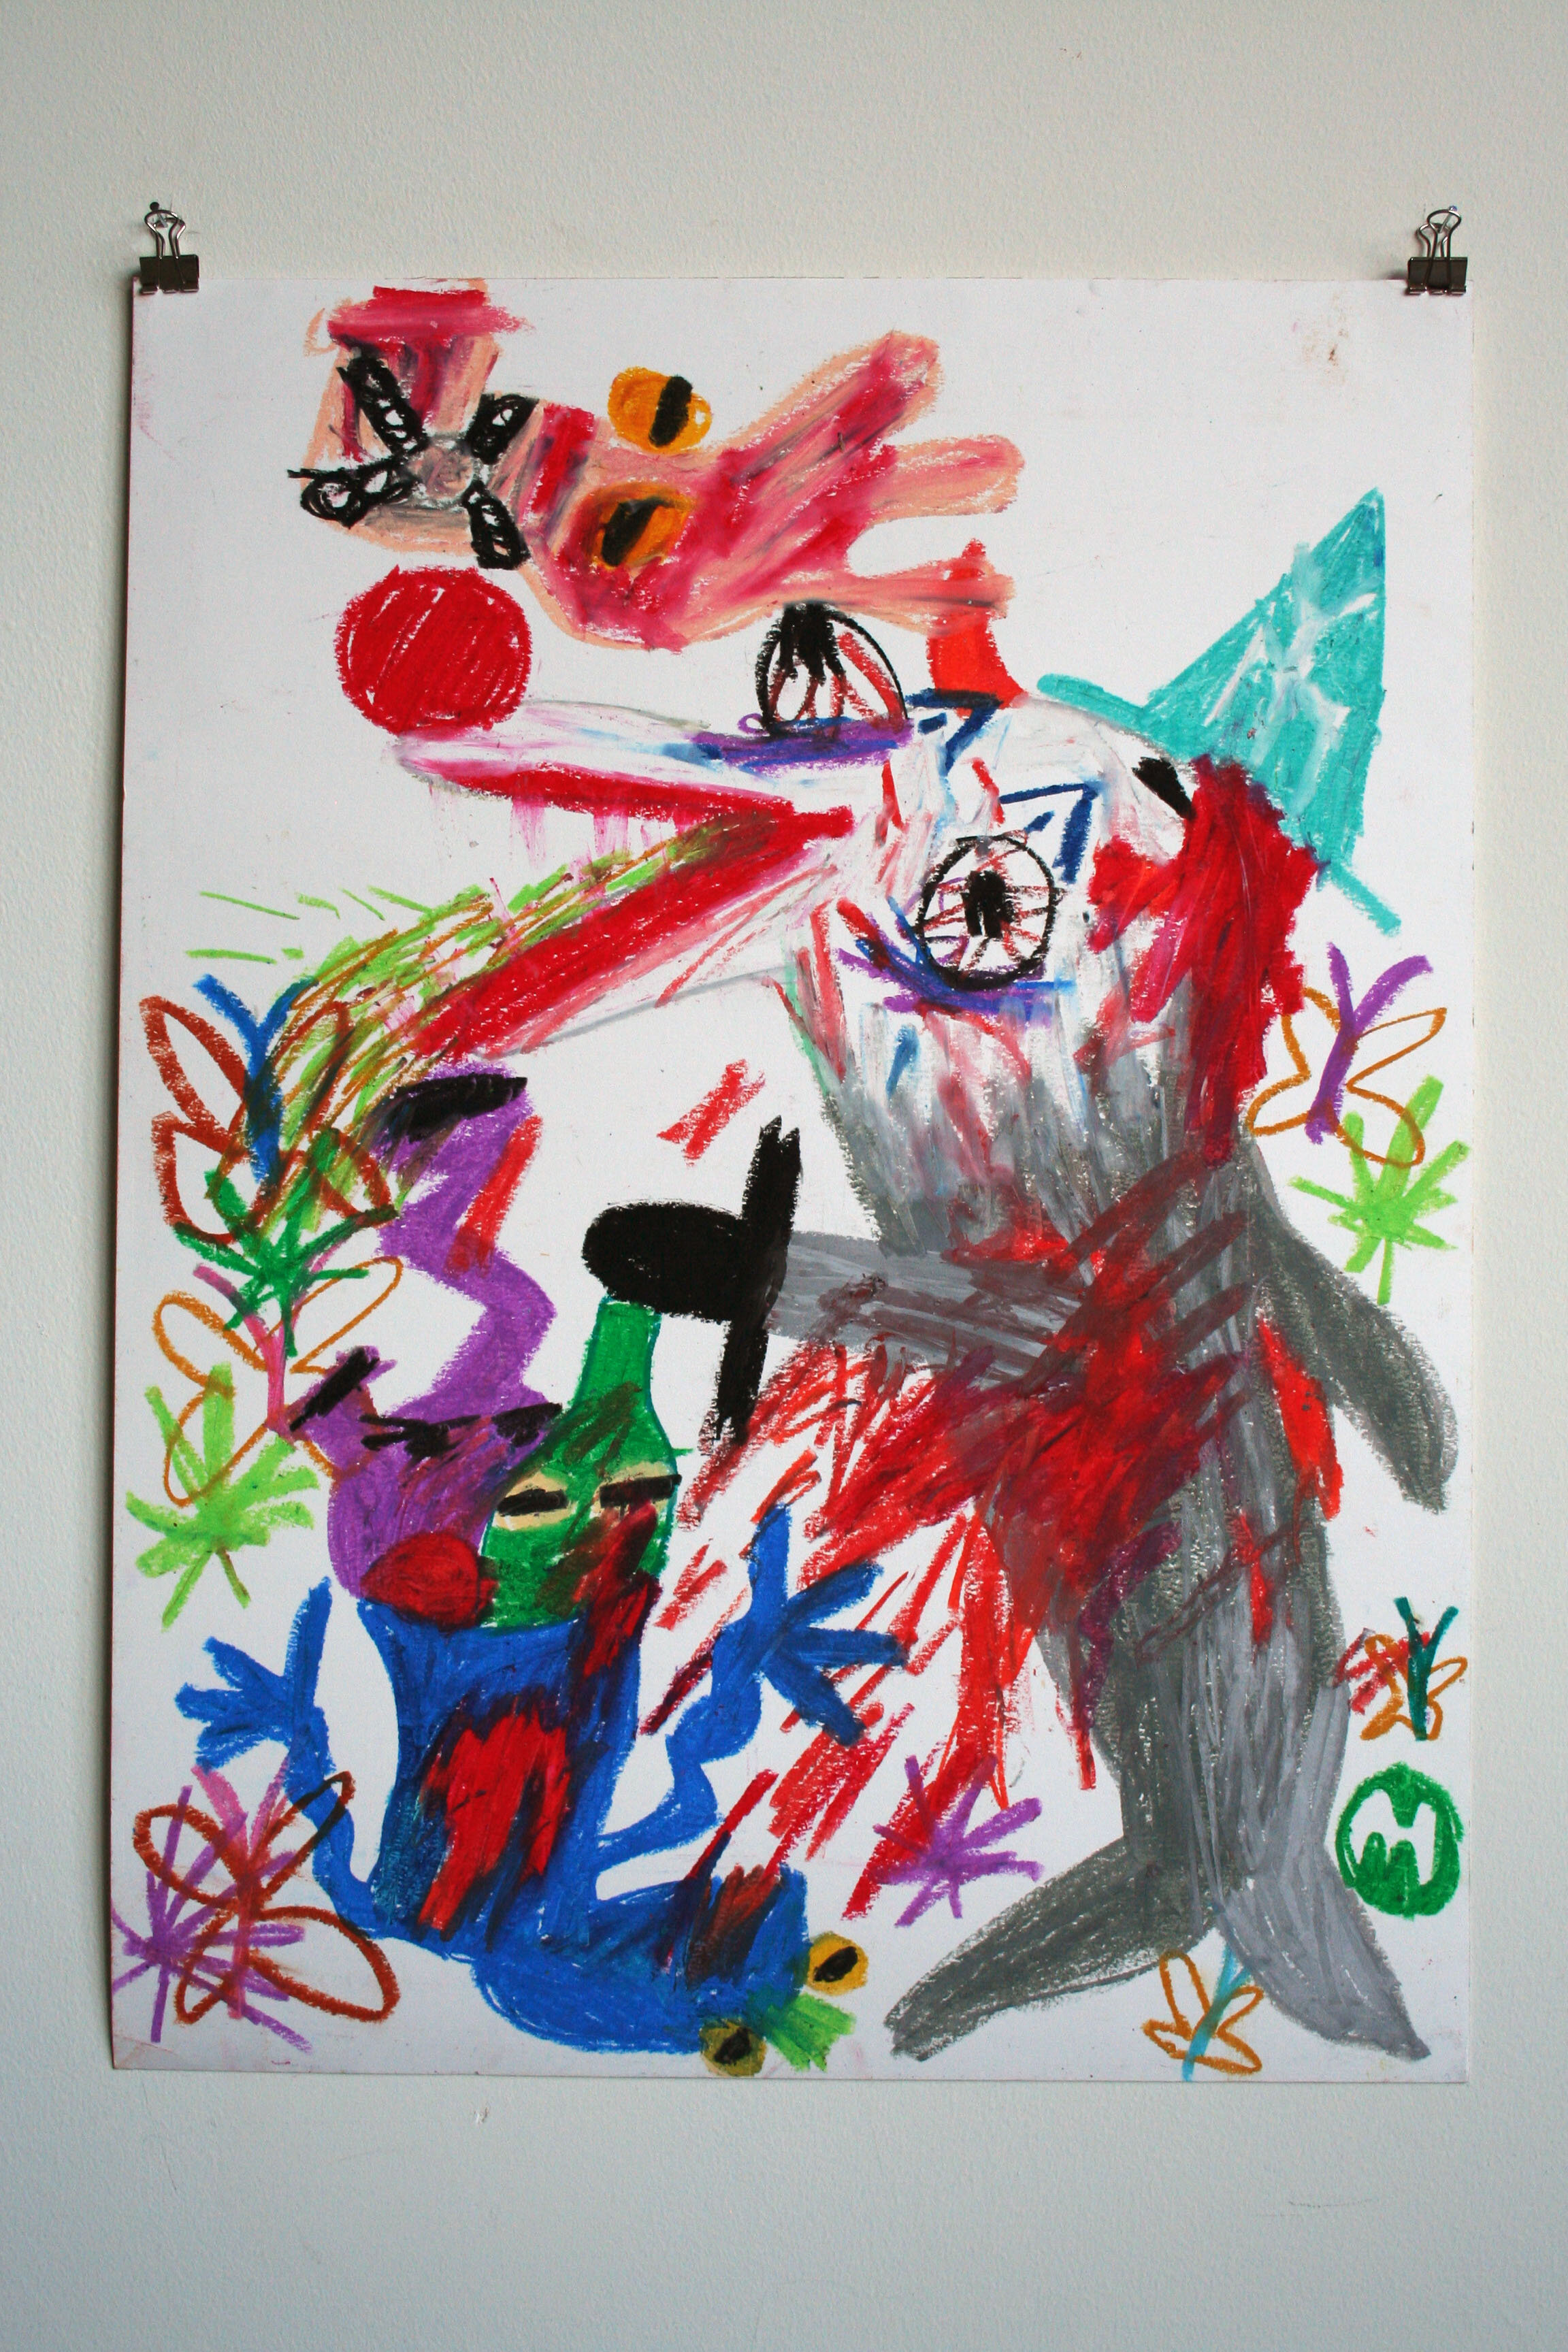   Dolphin Witch and Puppet Basket , 2014  24 x 18 inches (60.96 x 45.72 cm.)  Oil pastel on paper 